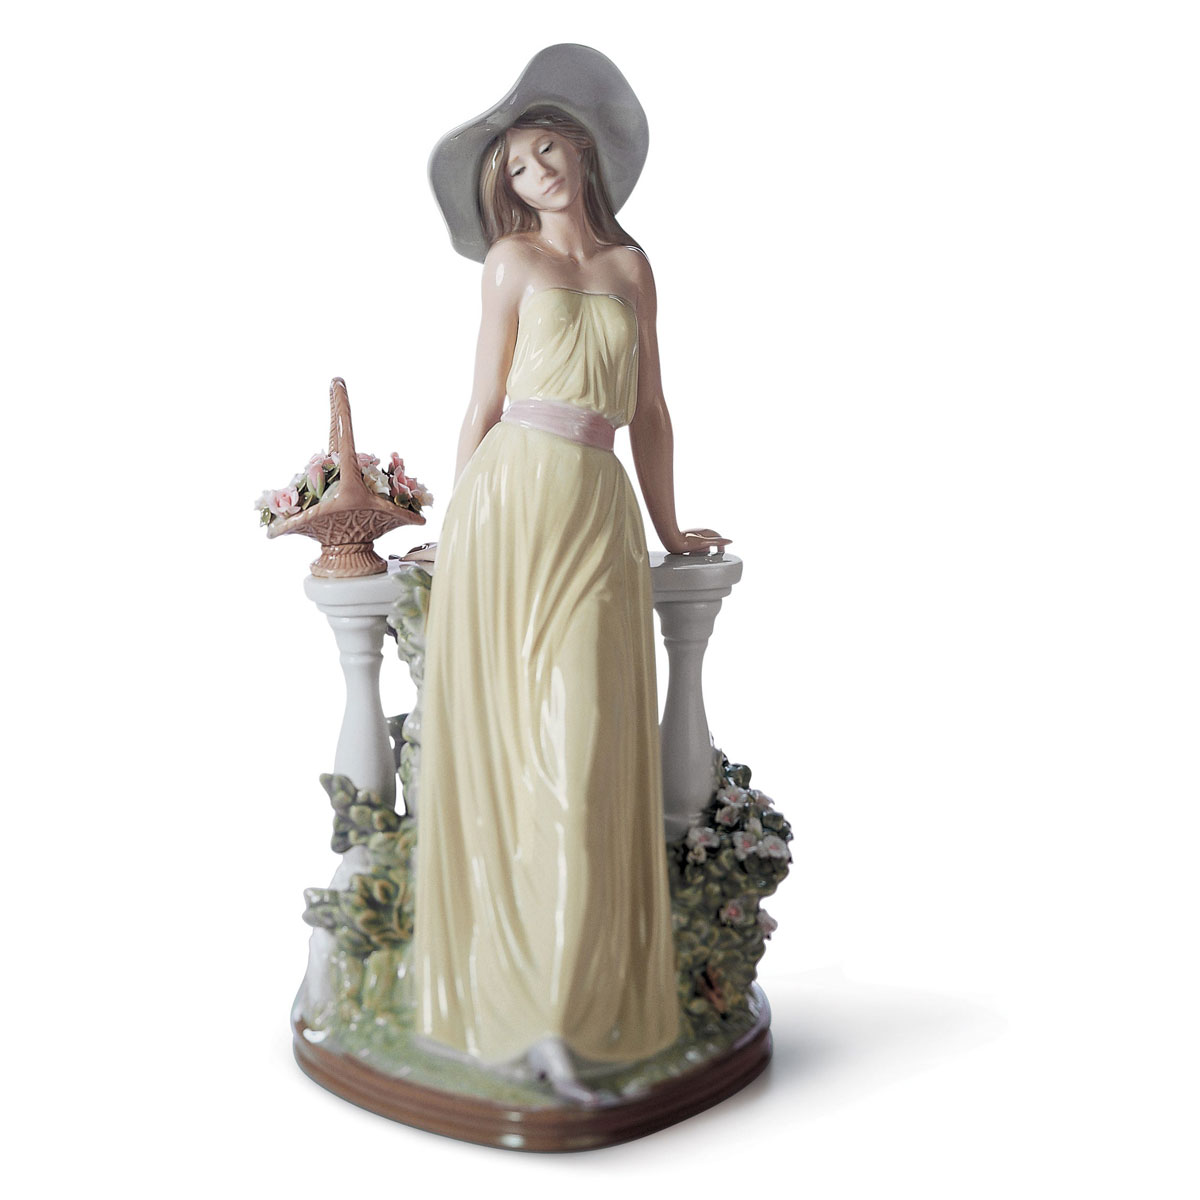 Lladro Classic Sculpture, Time For Reflection Woman Figurine